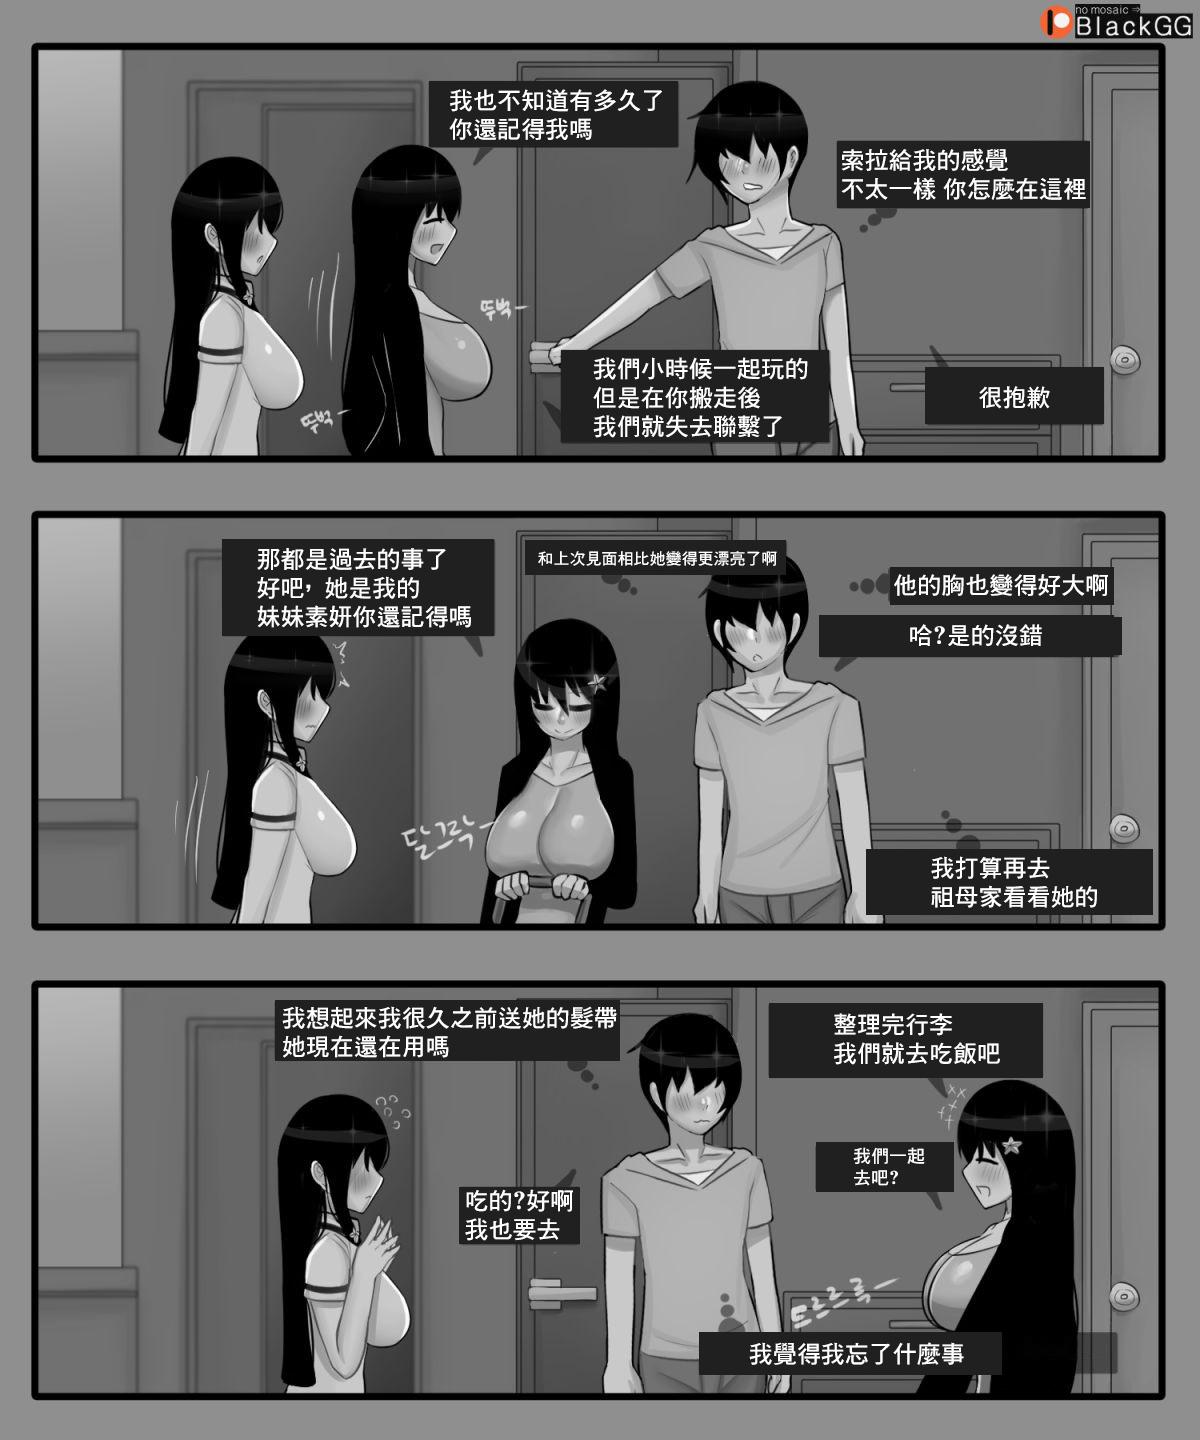 Dancing The story of a childhood friend becoming father's lover 1 - Original Virtual - Page 7